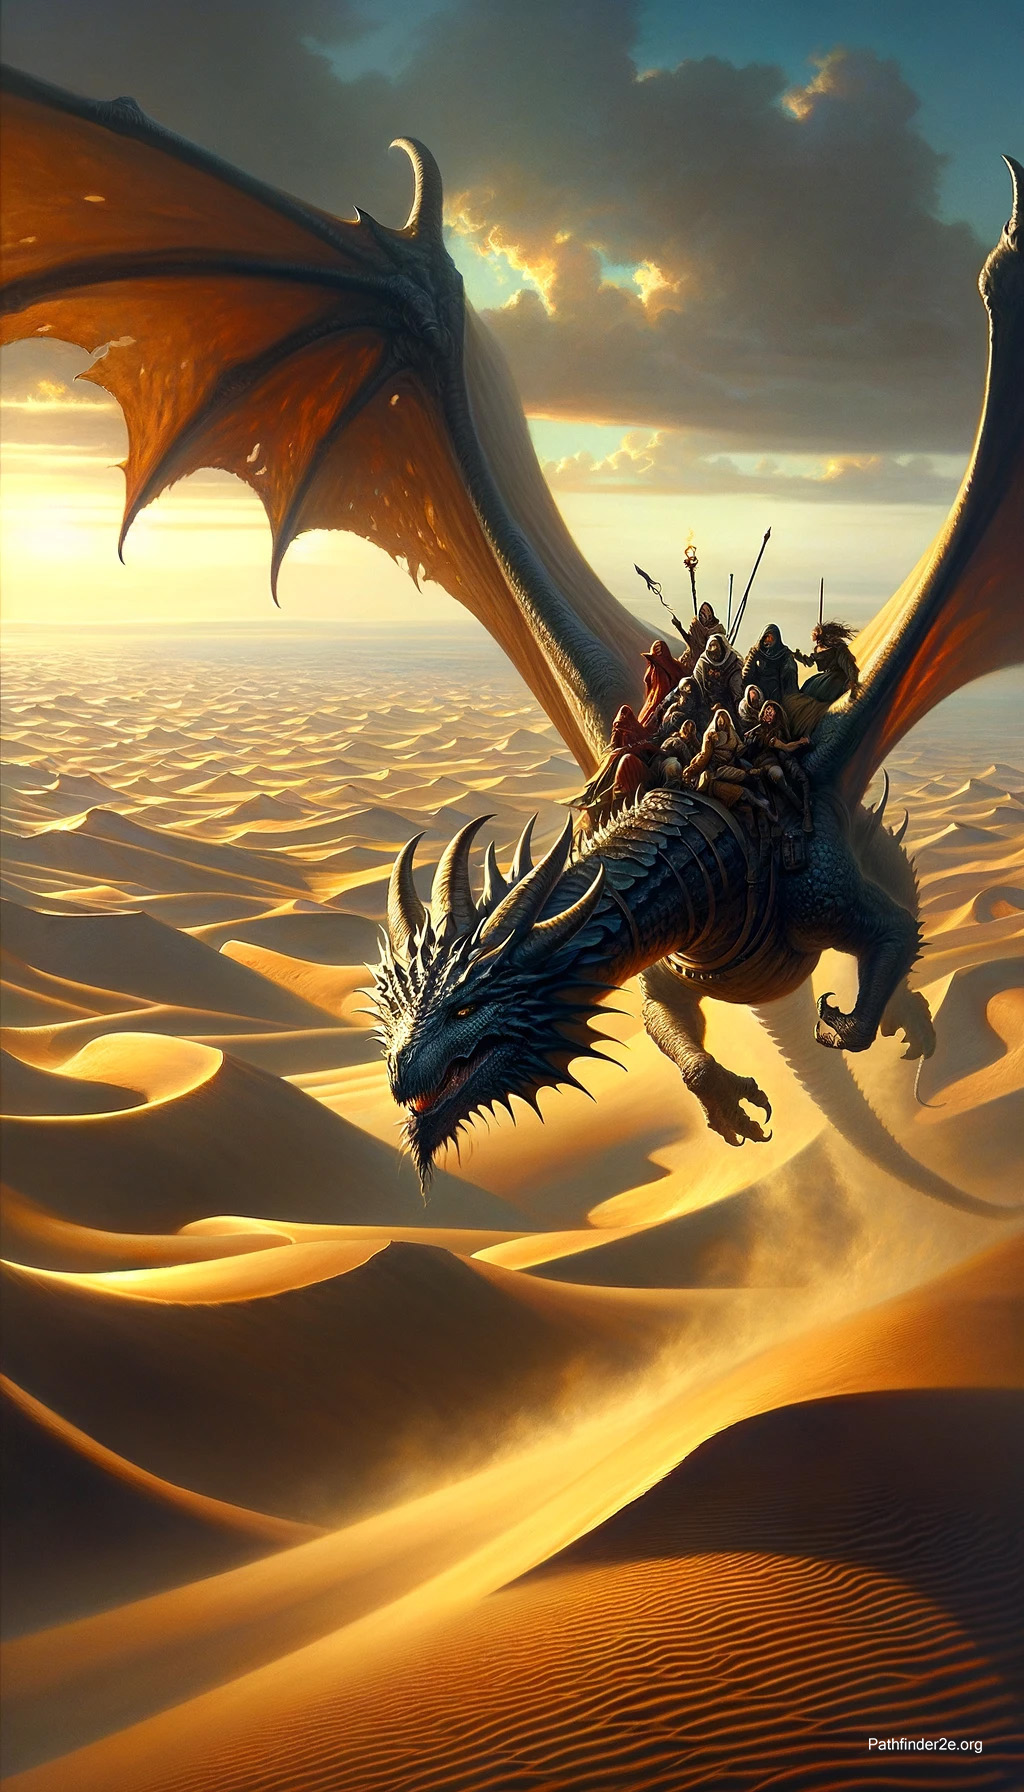 Character traveling through desert on the back of a flying dragon.